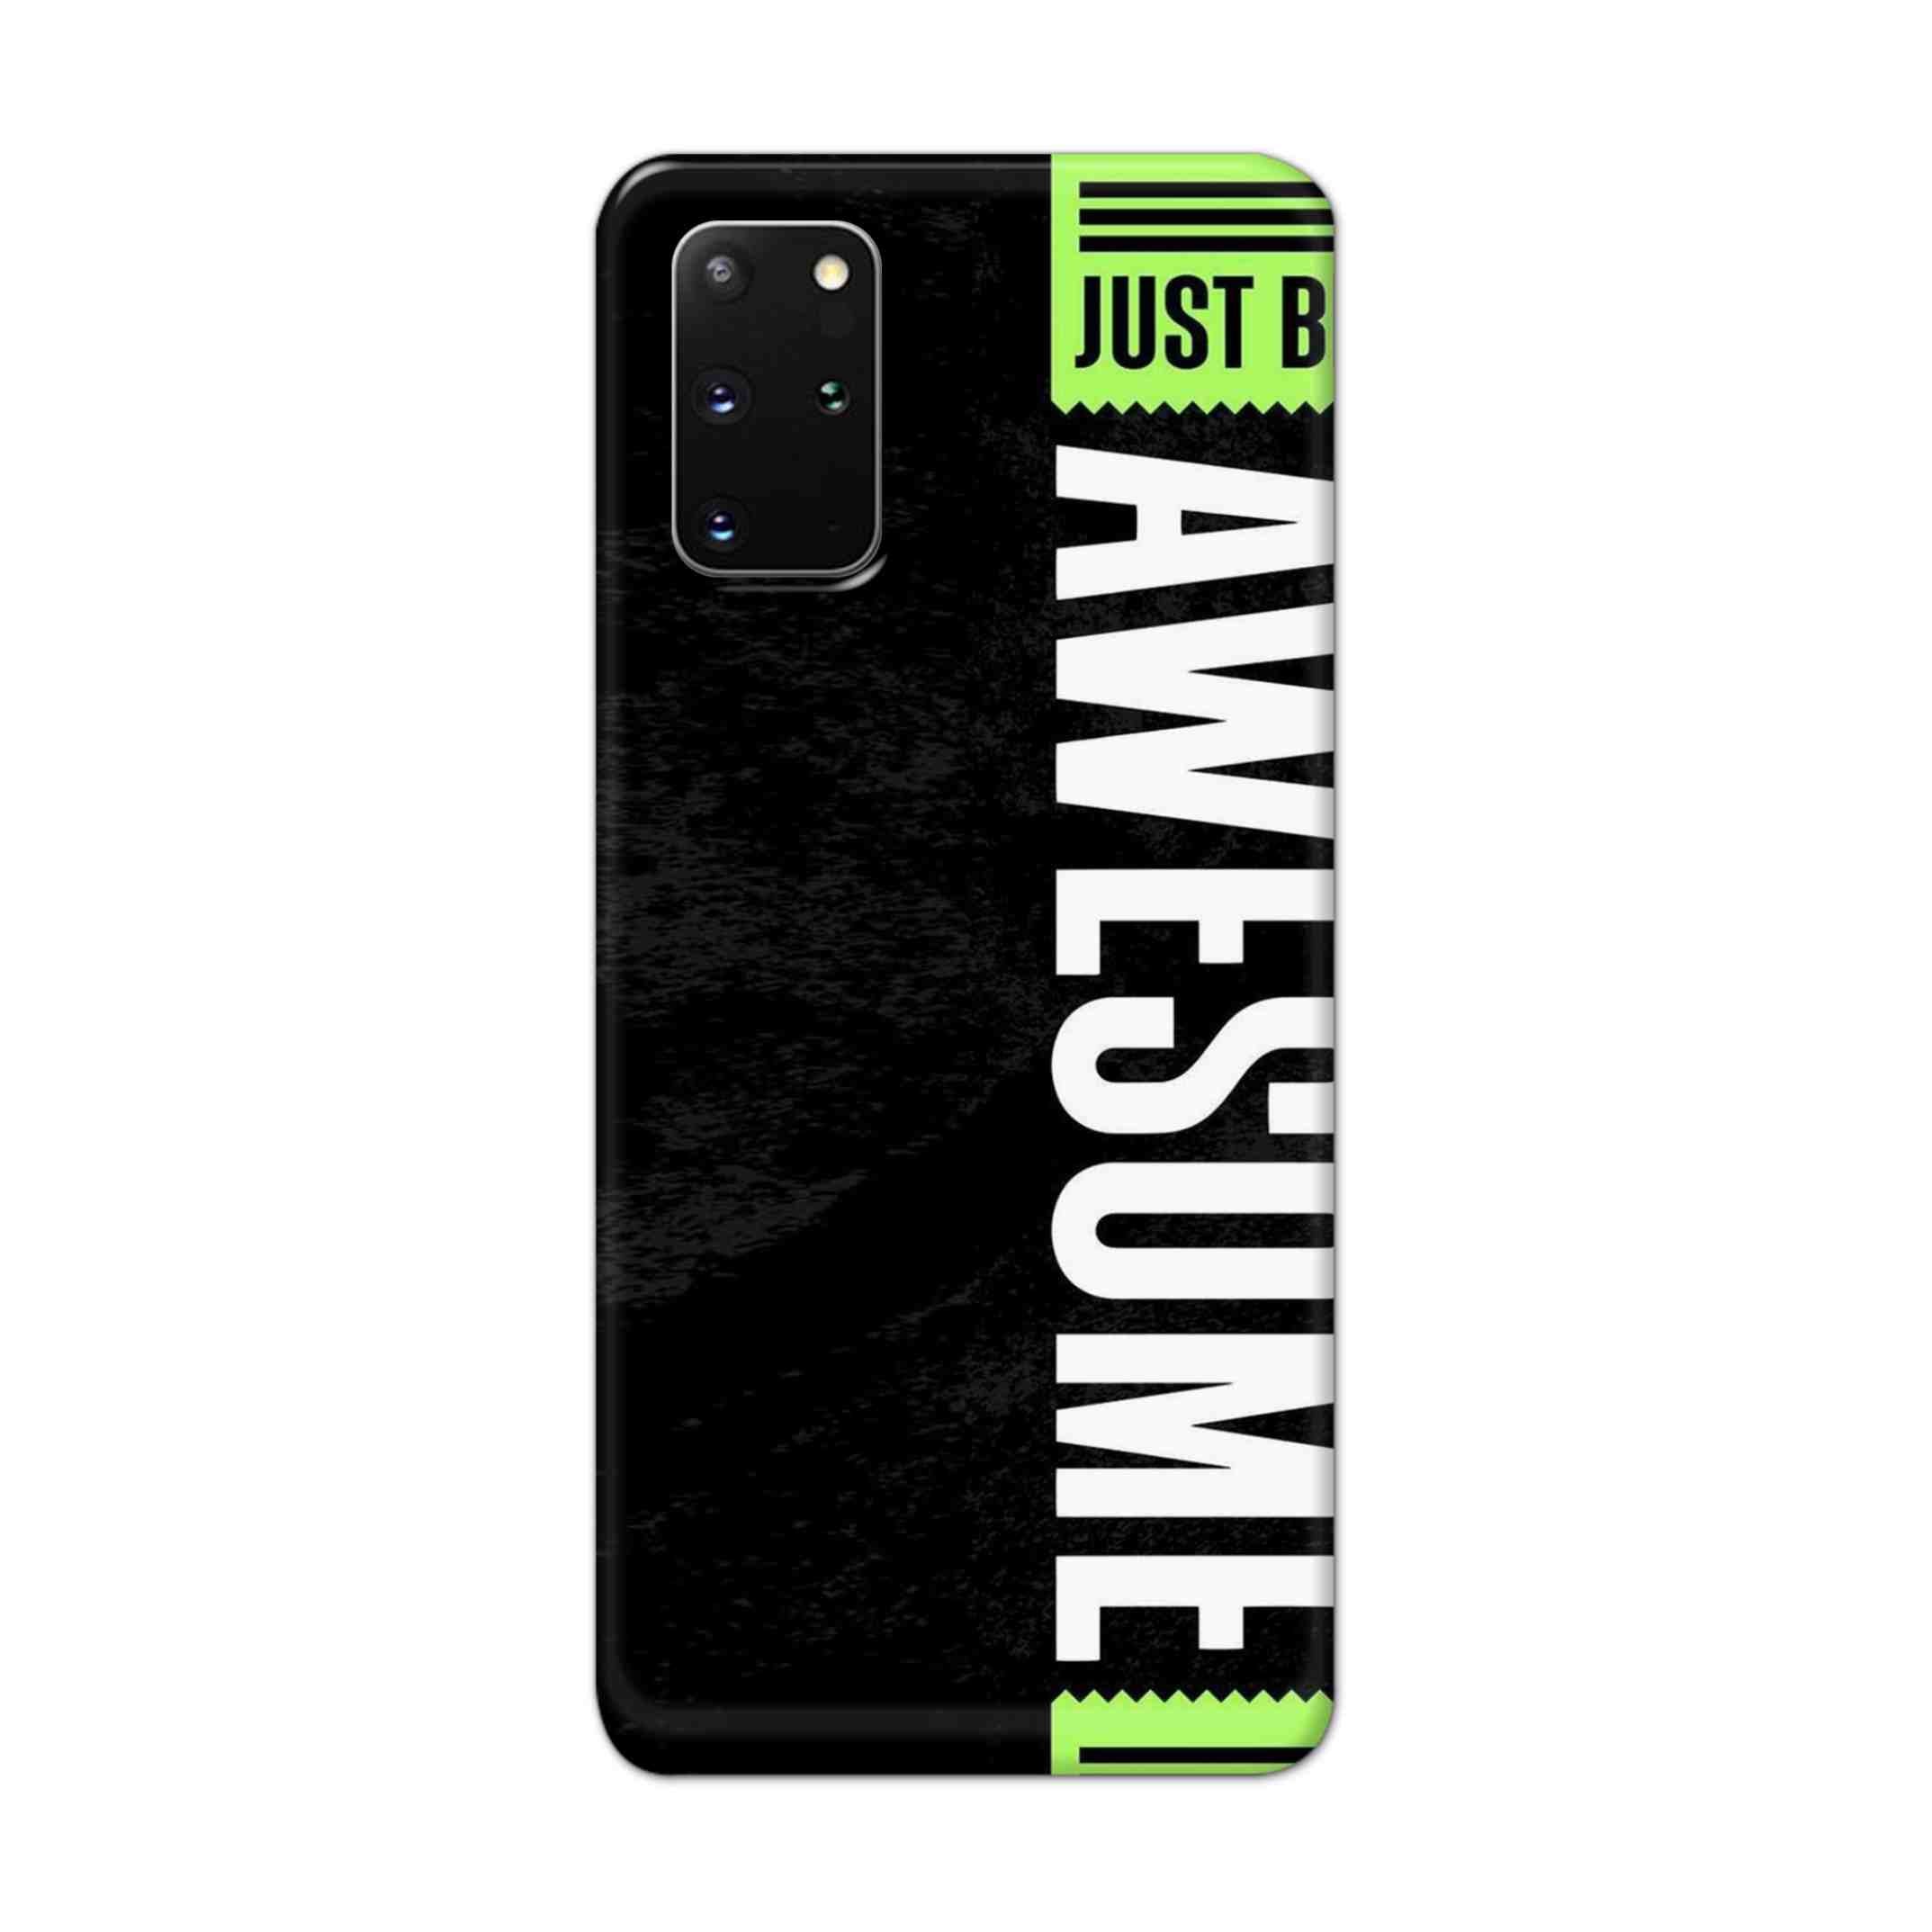 Buy Awesome Street Hard Back Mobile Phone Case Cover For Samsung Galaxy S20 Plus Online